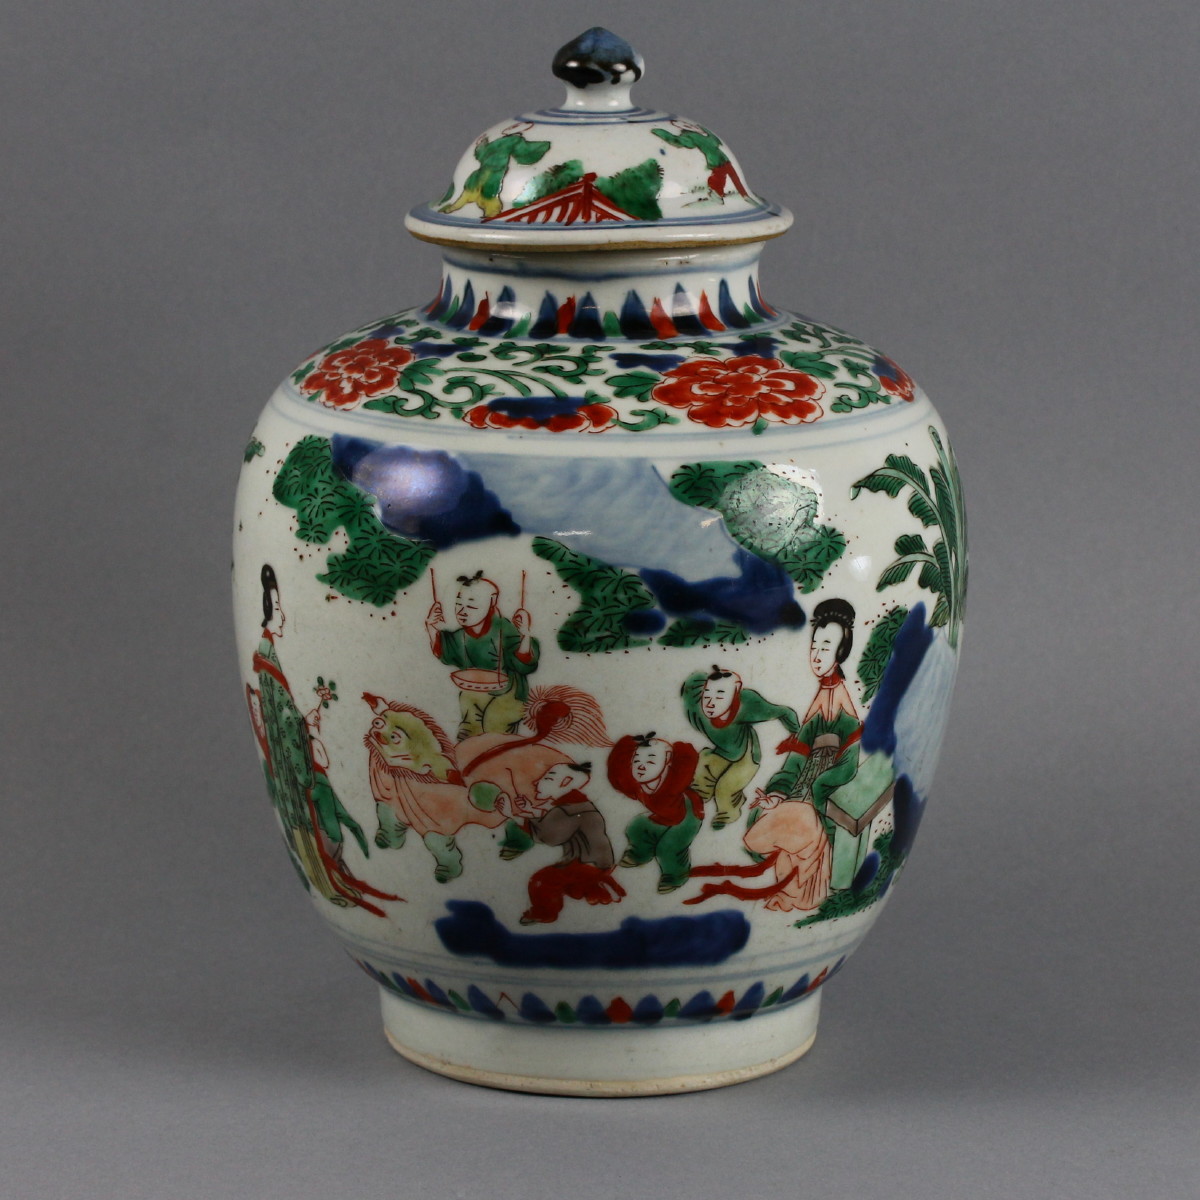 Chinese Chongzheng (1628-1643) transitional “Wucai boys” covered jar, 11½in, similar to an example that sold for HK$275,000 at Christie’s May 2012 sale in Hong Kong. Est. $3,000-$5,000. Manatee Galleries image.